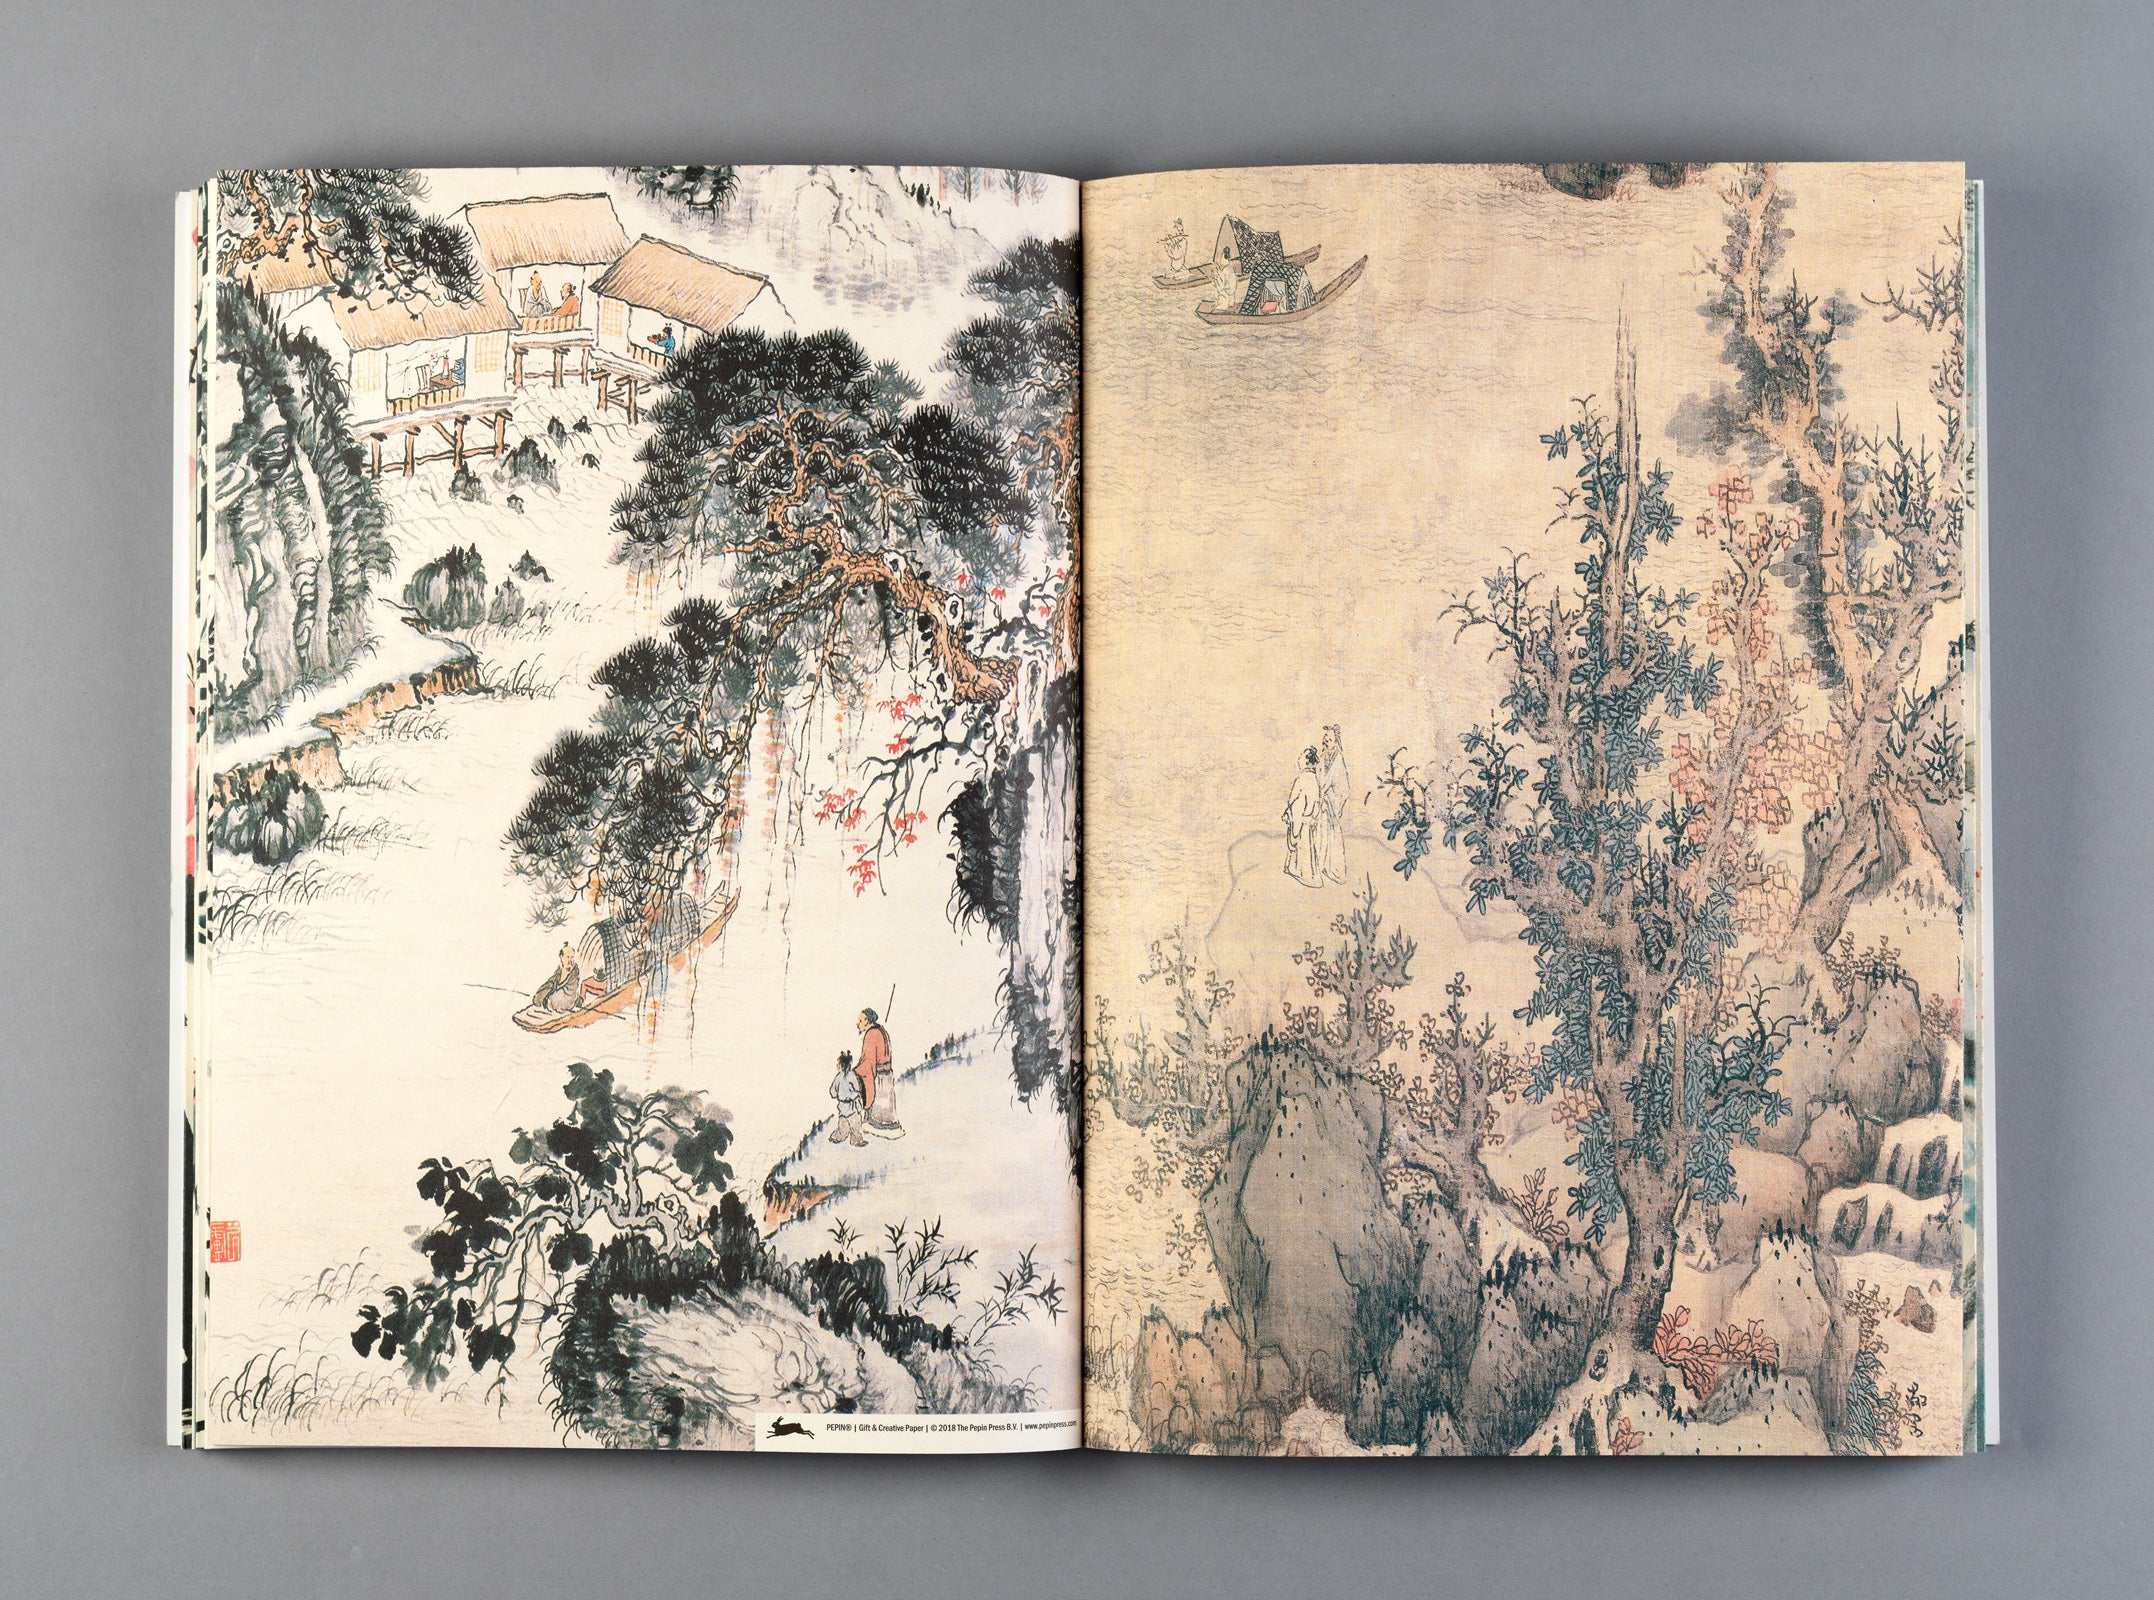 Gift &amp; creative papers - Chinese Art